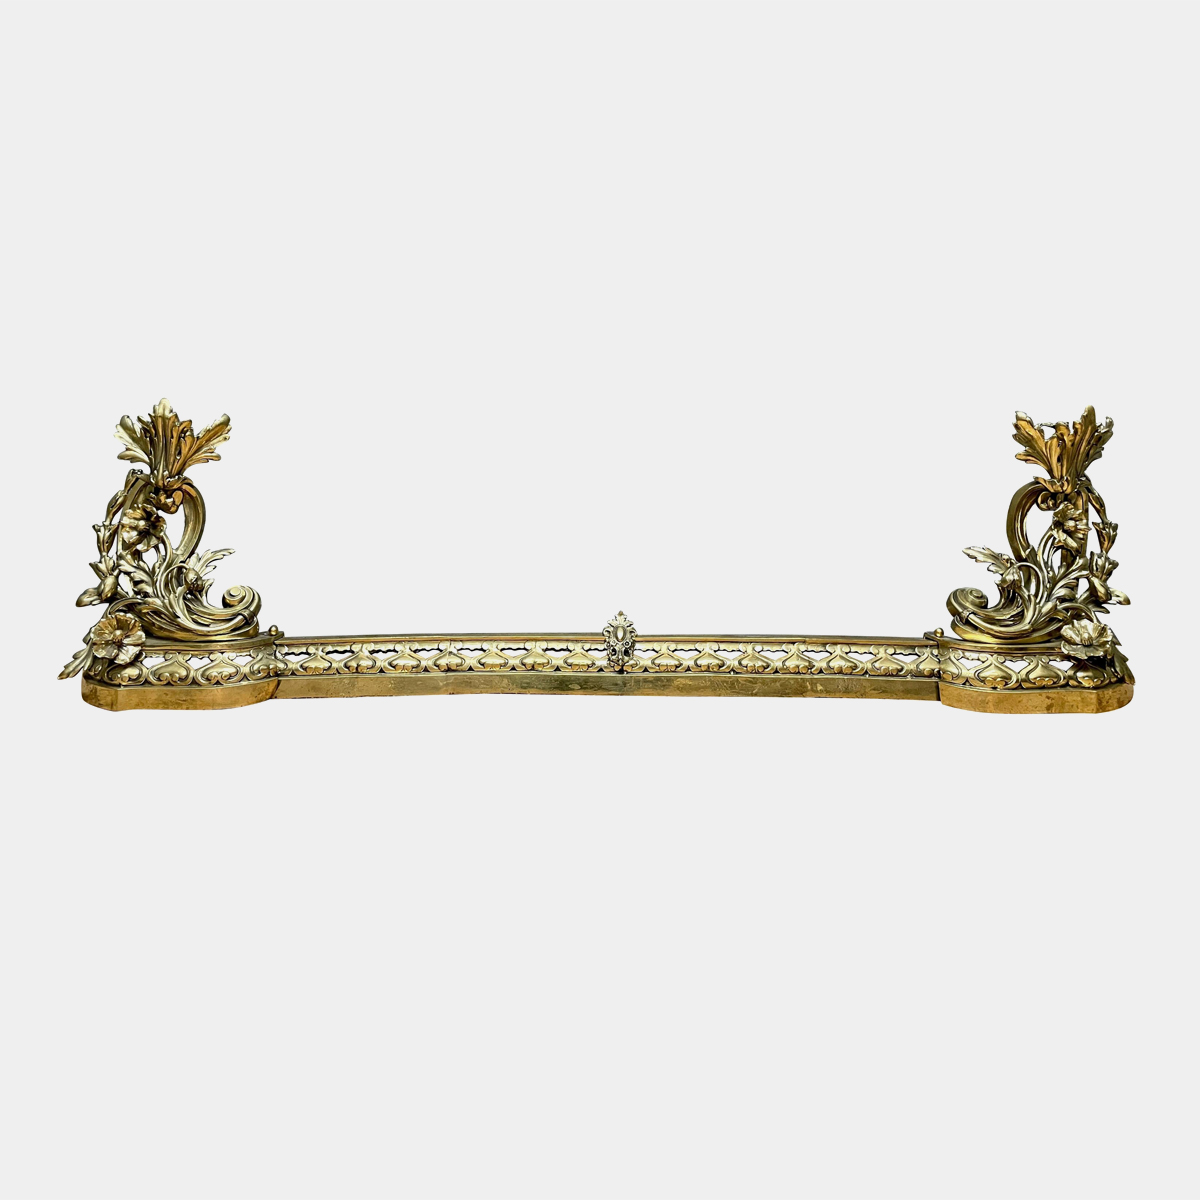 A Large French Rococo Style Brass Fireplace Fender